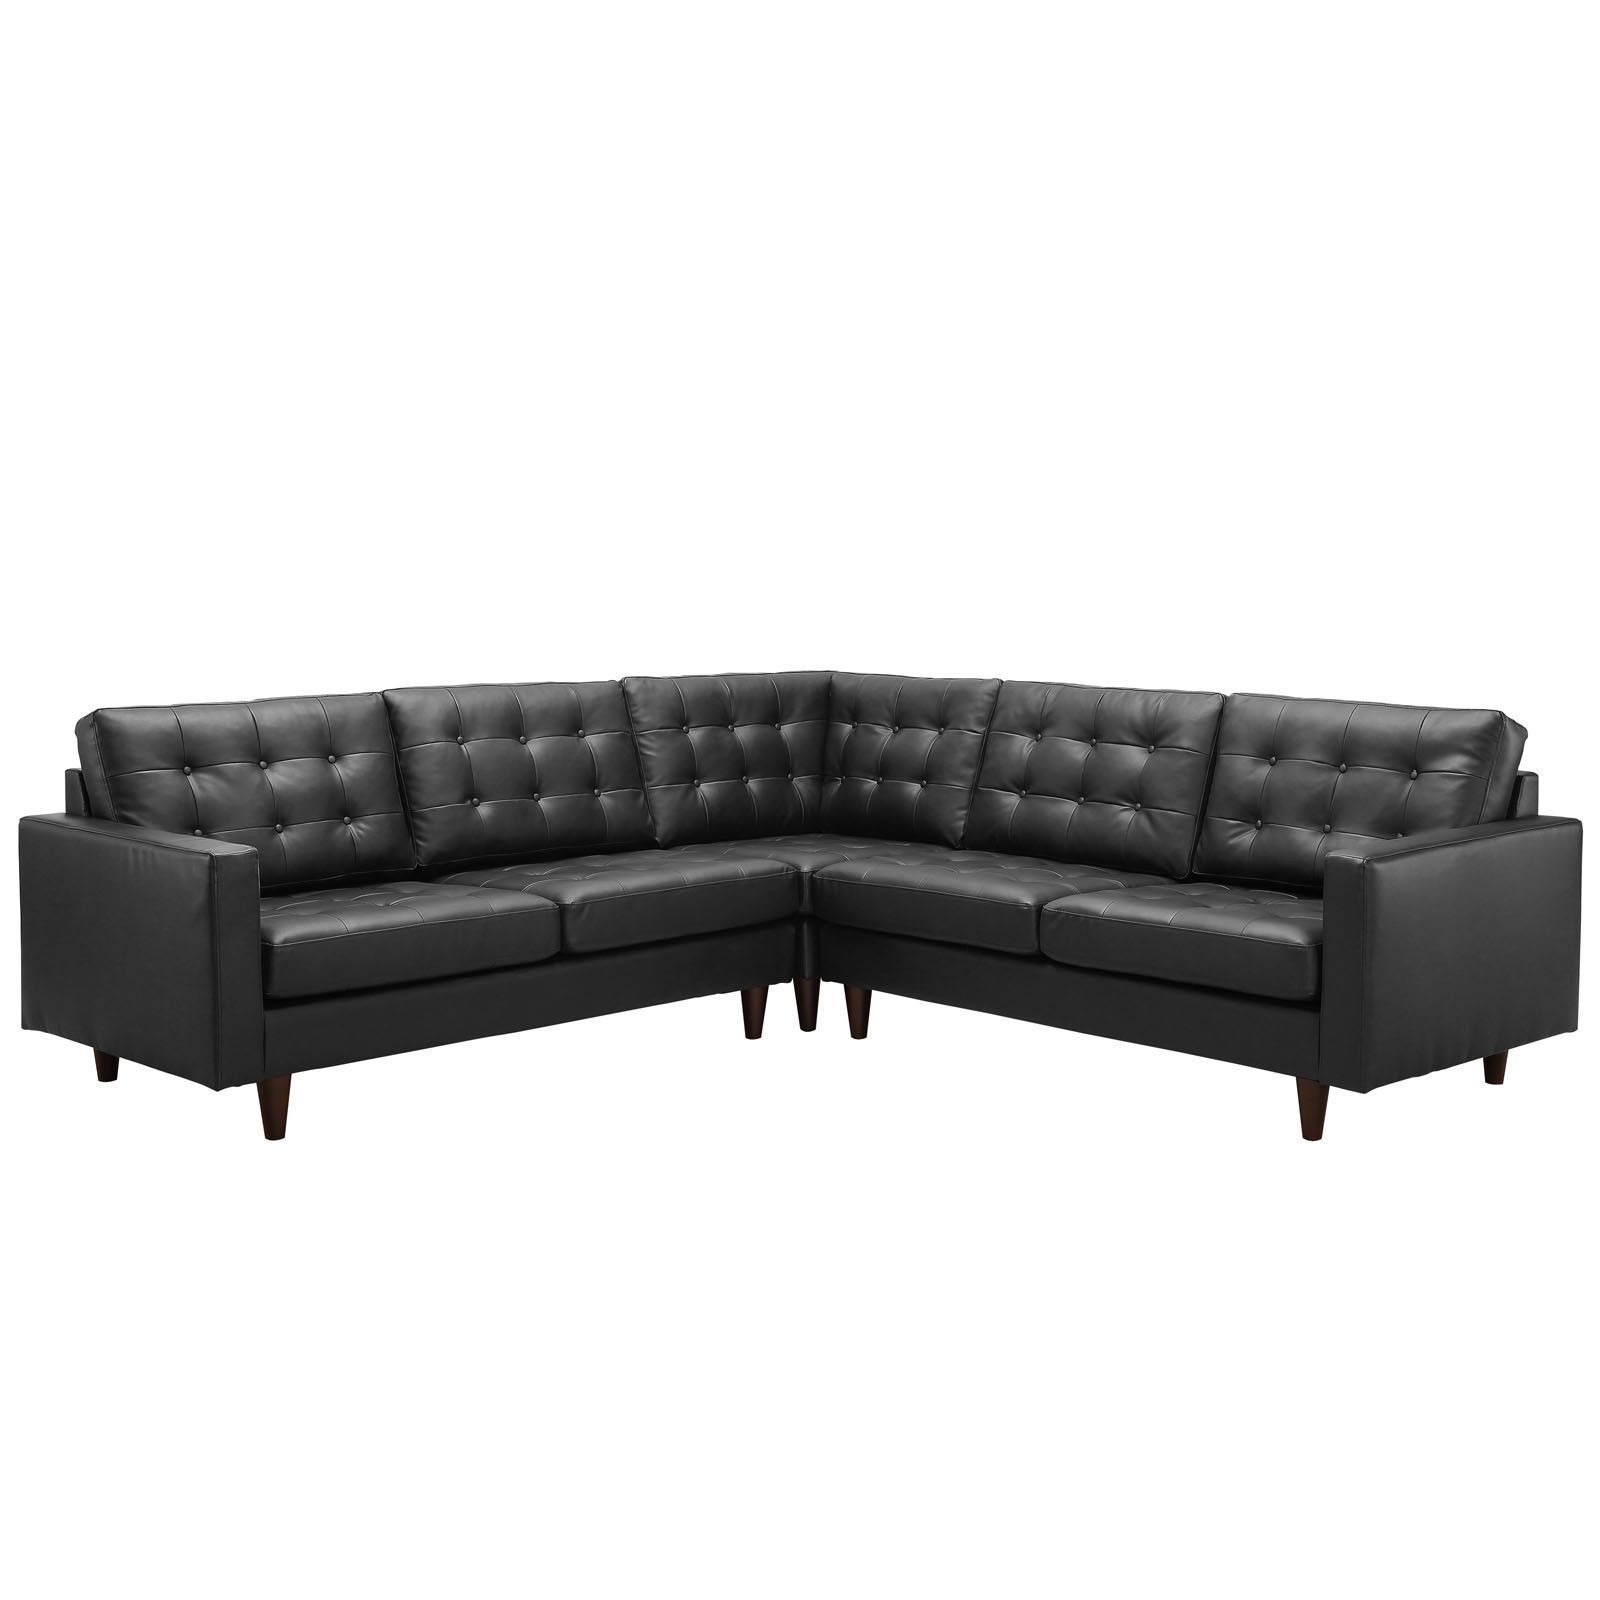 Widely Used Empress 3 Piece Leather Sectional Sofa Set (View 13 of 15)